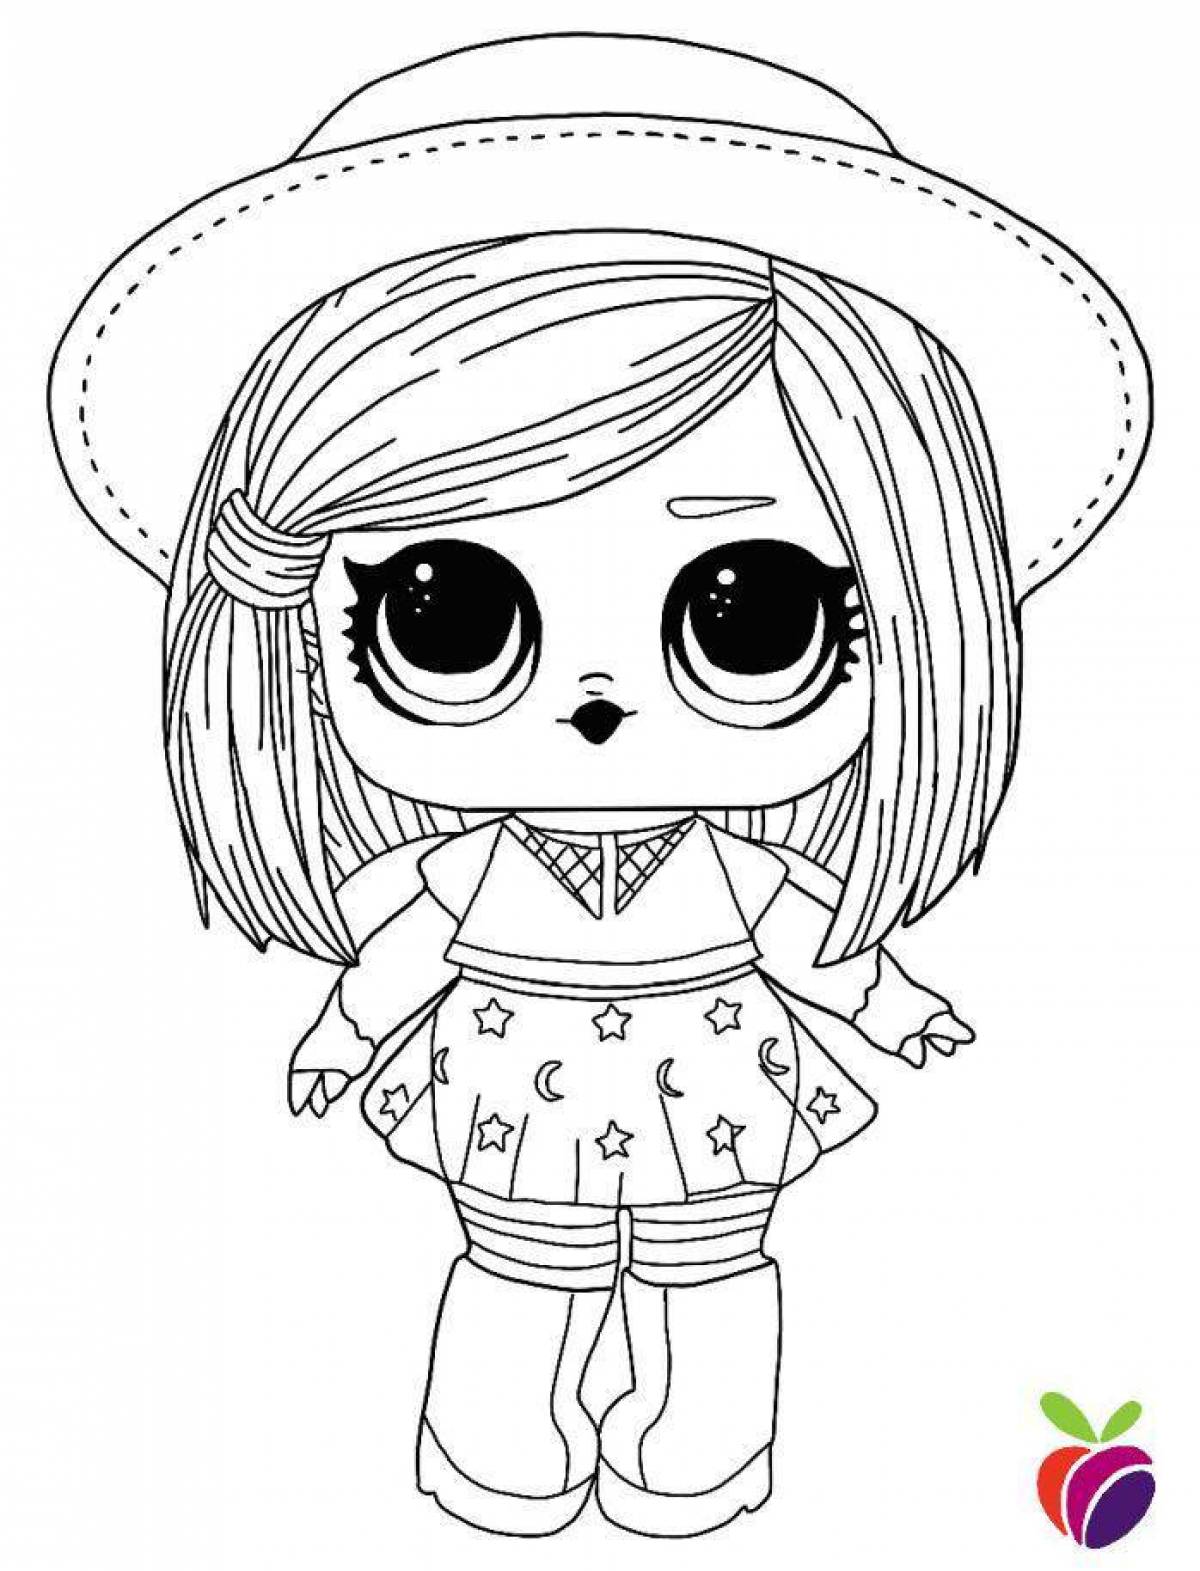 Adorable lola doll coloring page